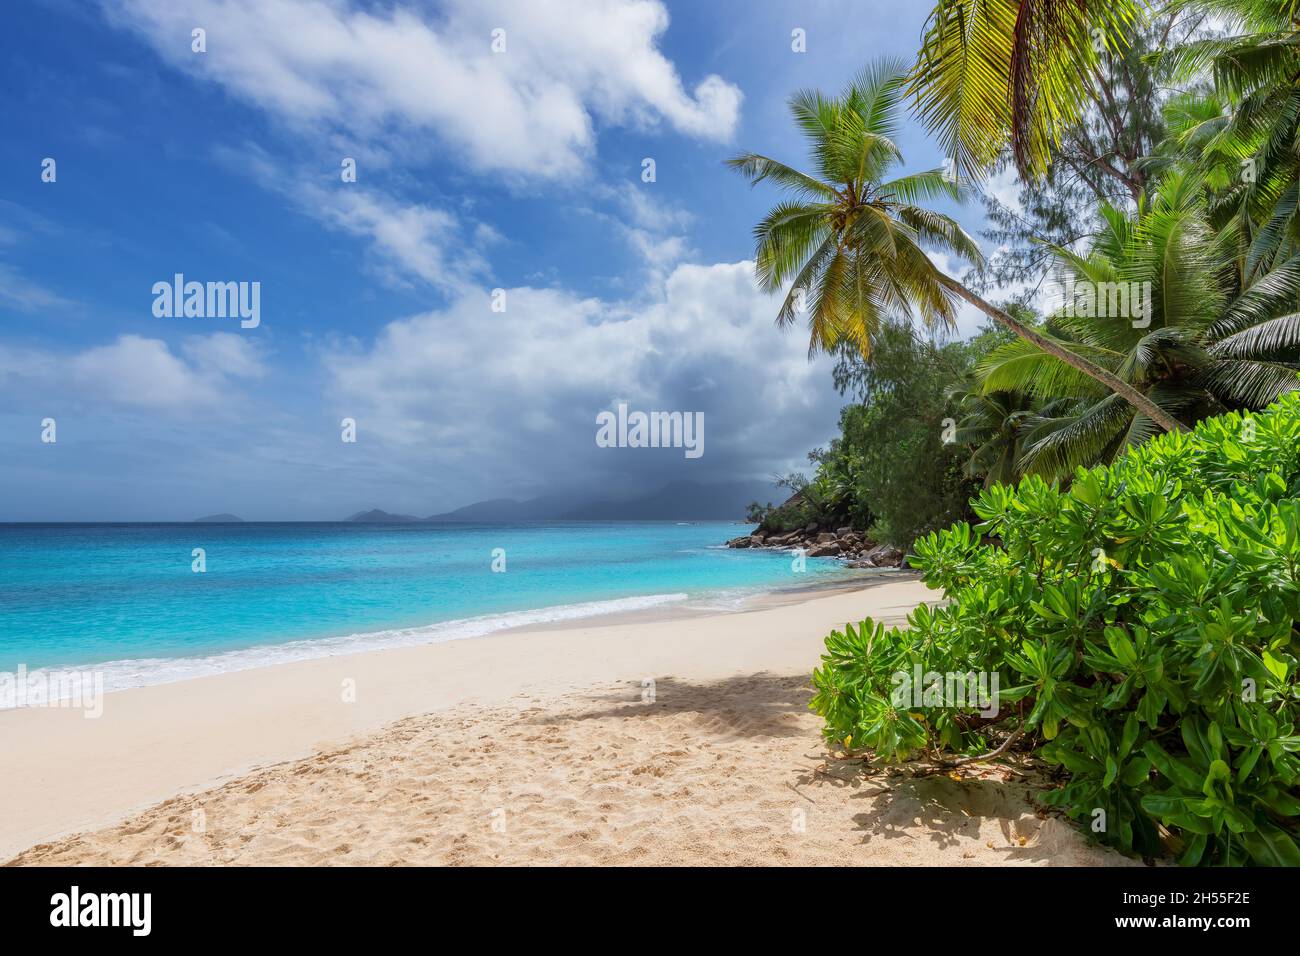 Tropical beach. Palm trees and white sand on Caribbean island Stock Photo